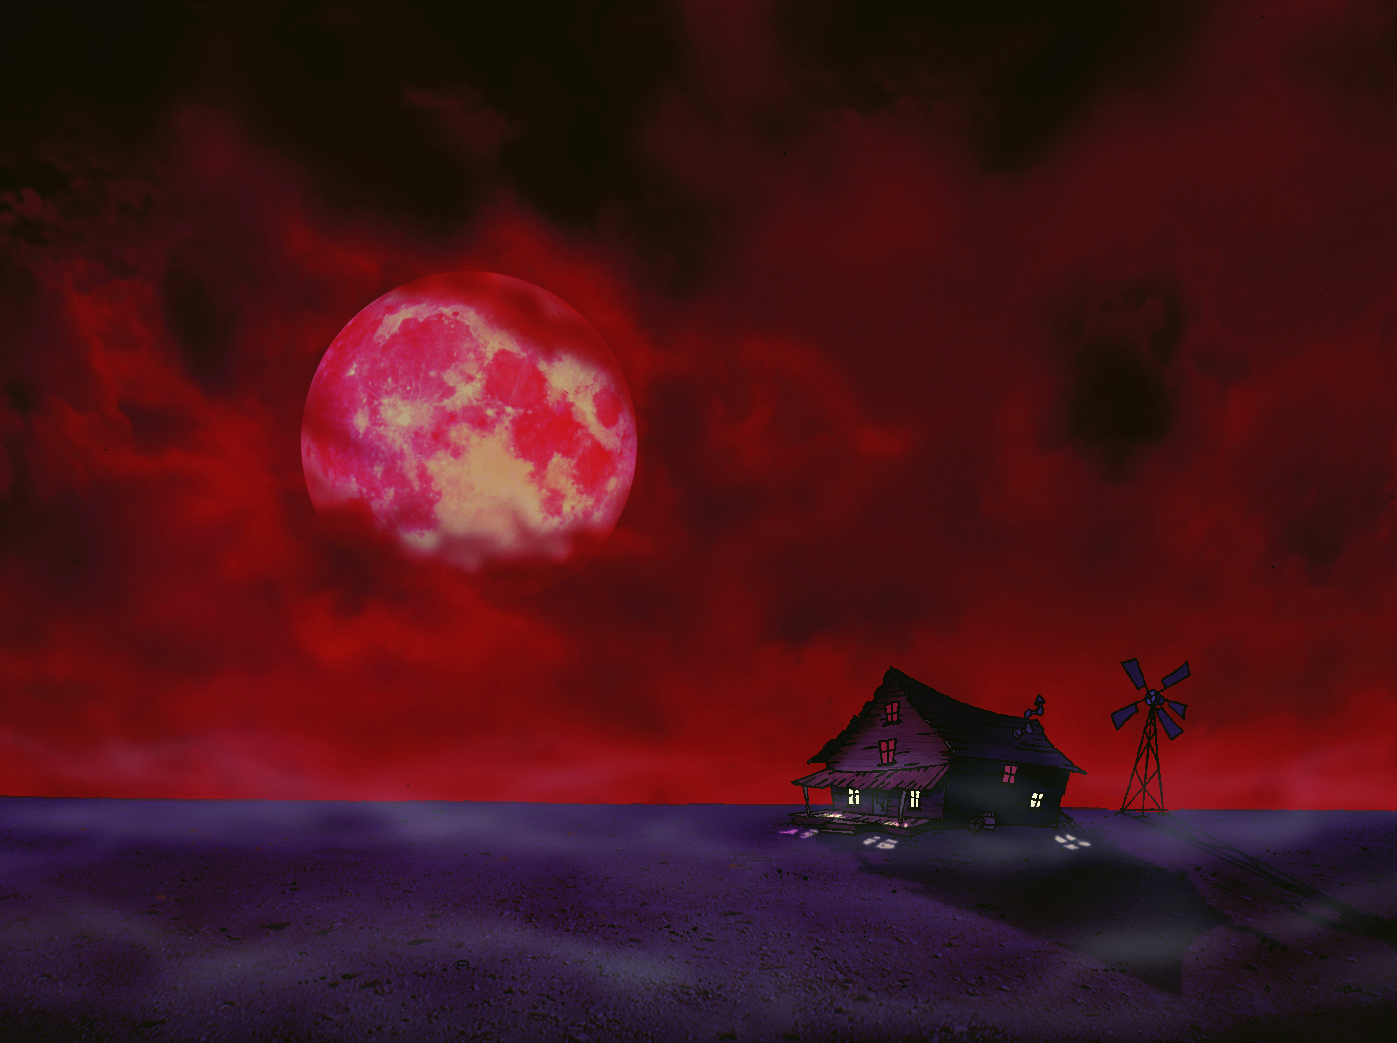 General 1397x1043 Courage the Cowardly Dog cartoon night full moon mist cottage wasteland windmill red sky house Moon digital art